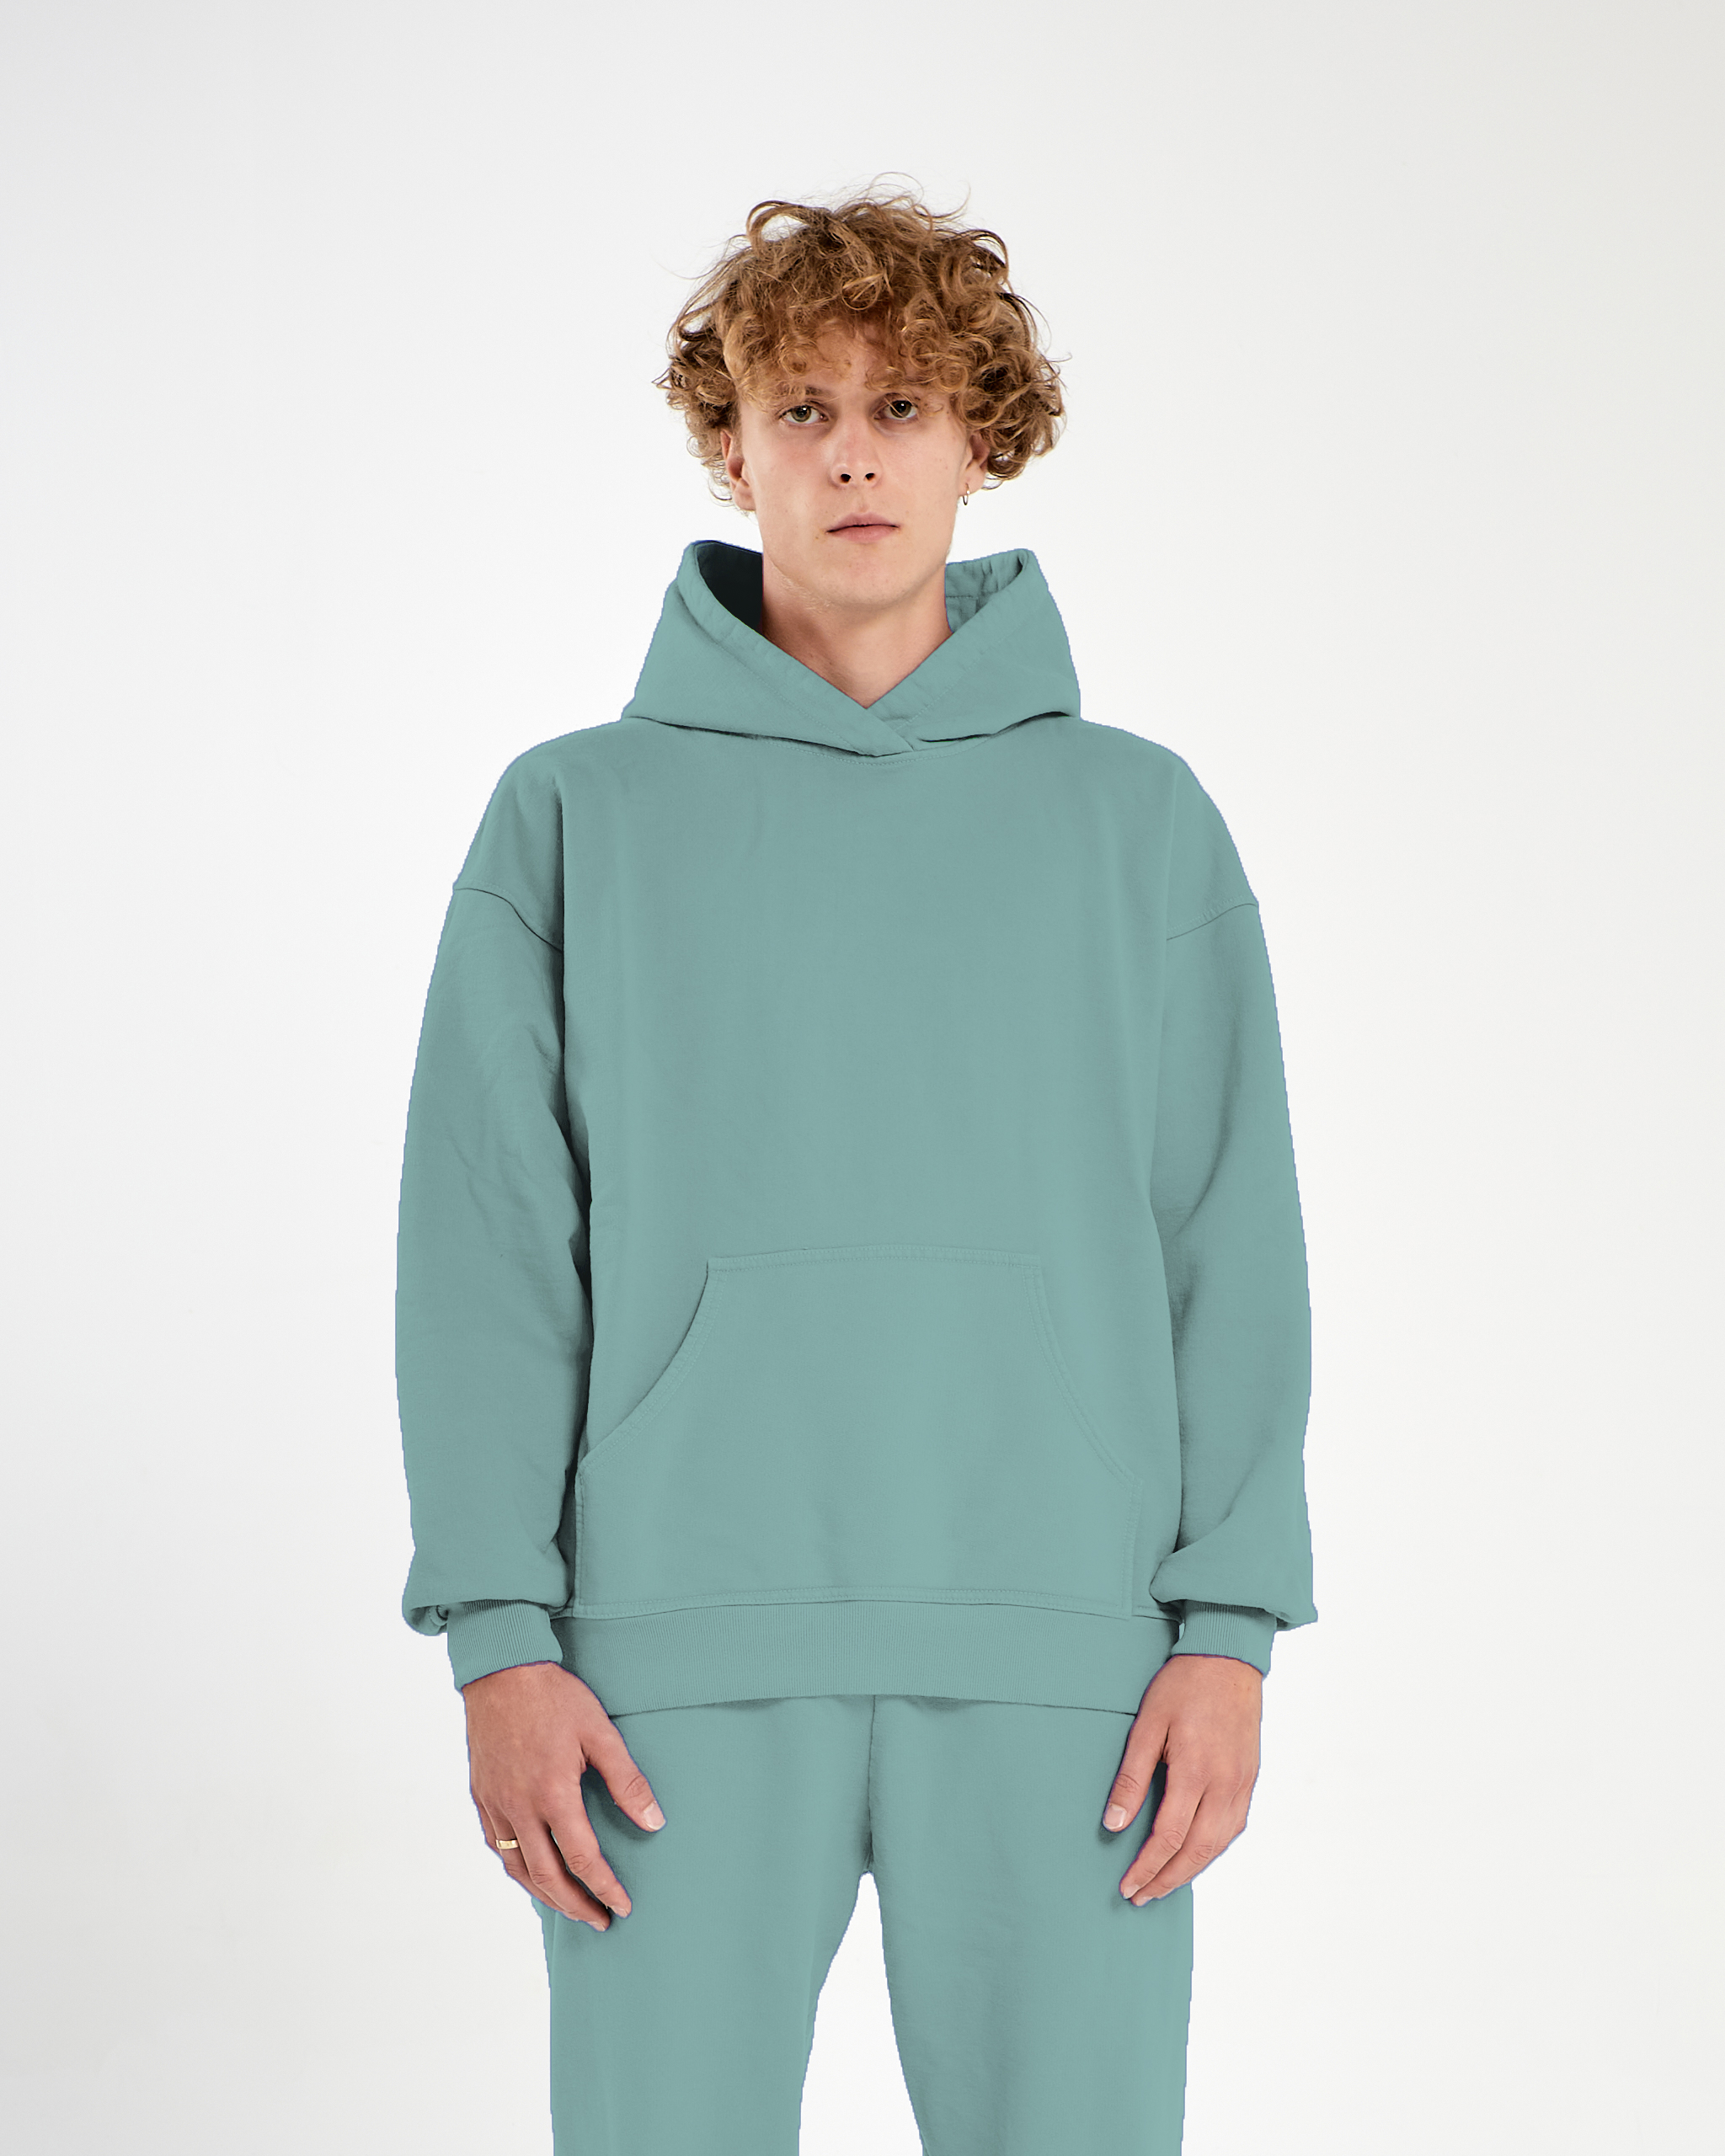 MINERAL BLUE FRENCH TERRY HOODIE – COTTON GARMENTS